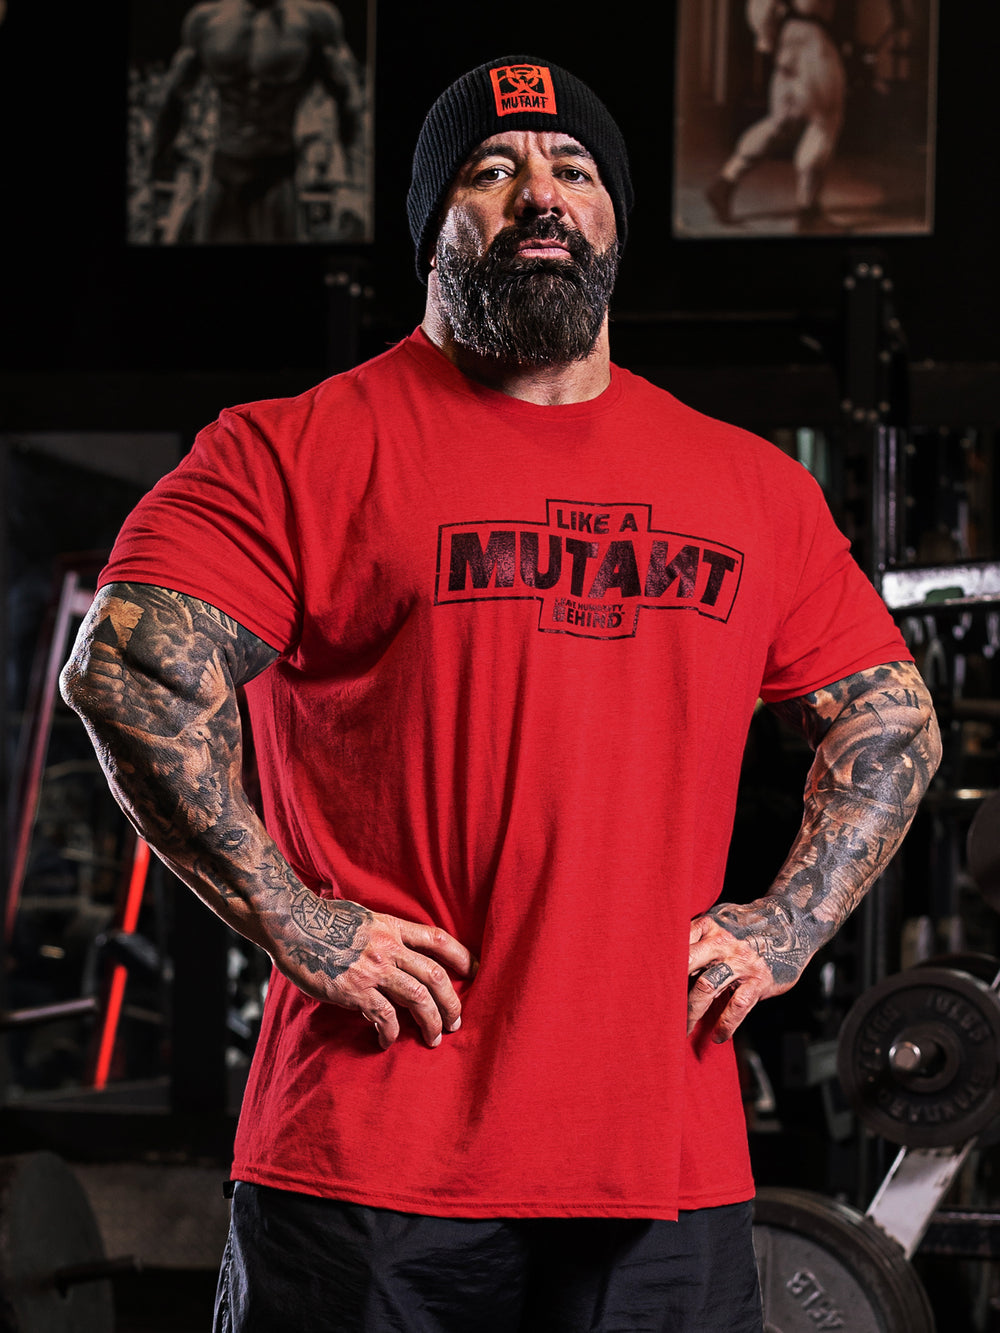 Dusty Hanshaw at the gym, staring at the camera while wearing the red 'MUTANT's Truck Month' t-shirt, which features the 'Like a Mutant' phrase and 'Leave Humanity Behind' tagline in black.